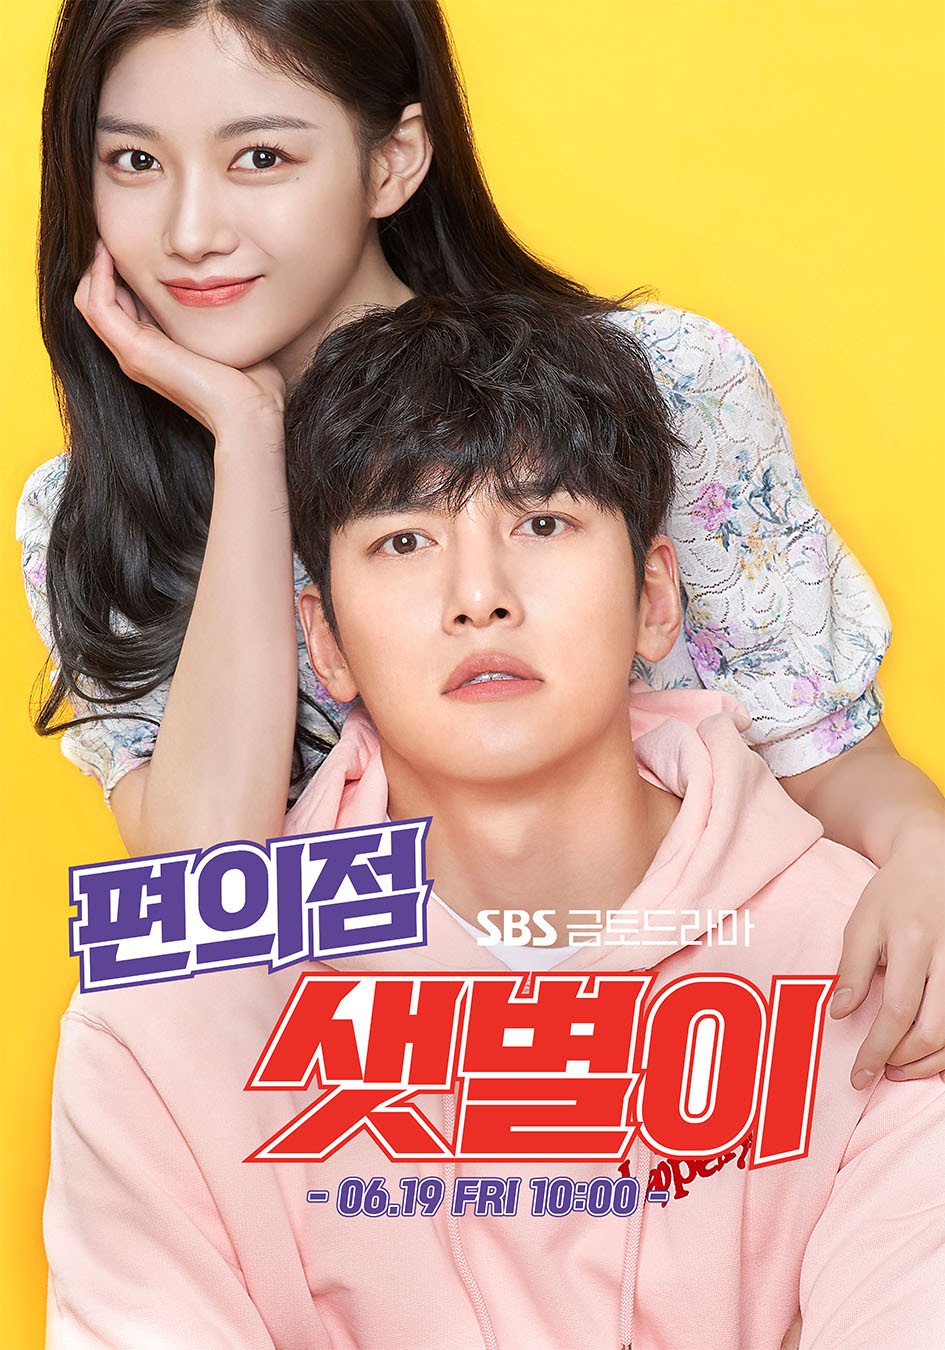 convenience-store-couple-ji-chang-wook-and-kim-yoo-jung-appear-on-new-backstreet-rookie-poster-3